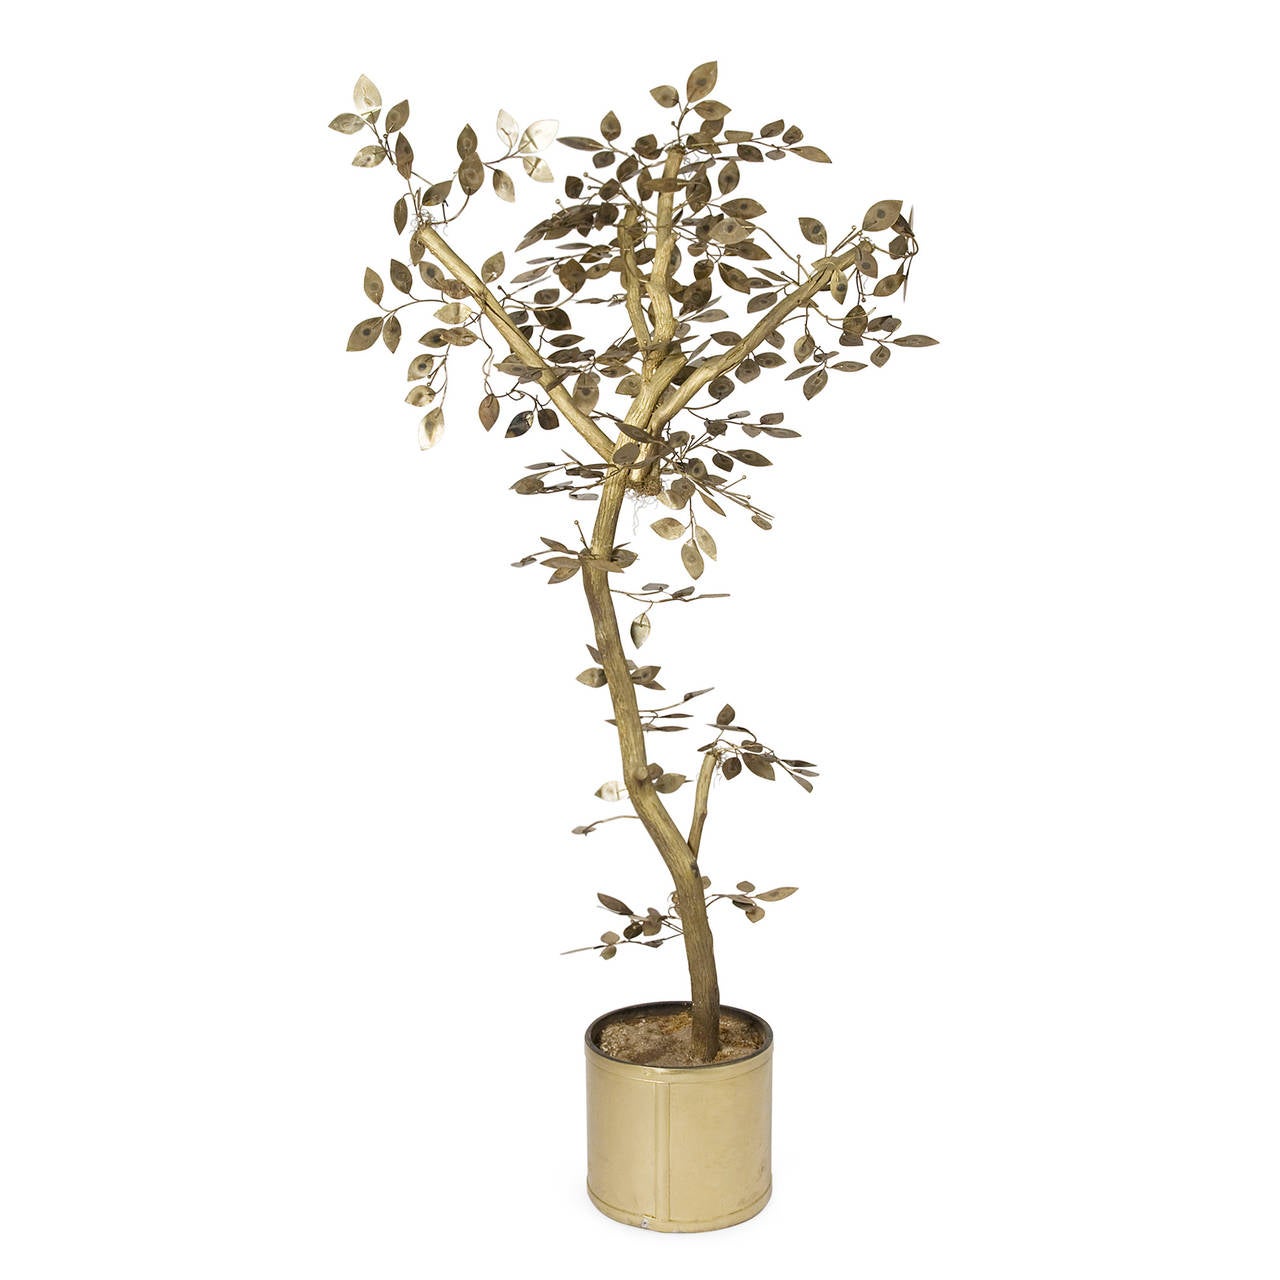 Large brass and gilt painted wood tree sculpture, the leaves in patinated brass, attached to genuine wood tree set into a resin material in a brass cylindrical pot, by C. Jere for Artisan House, America, early 1970s. Height 6 feet.